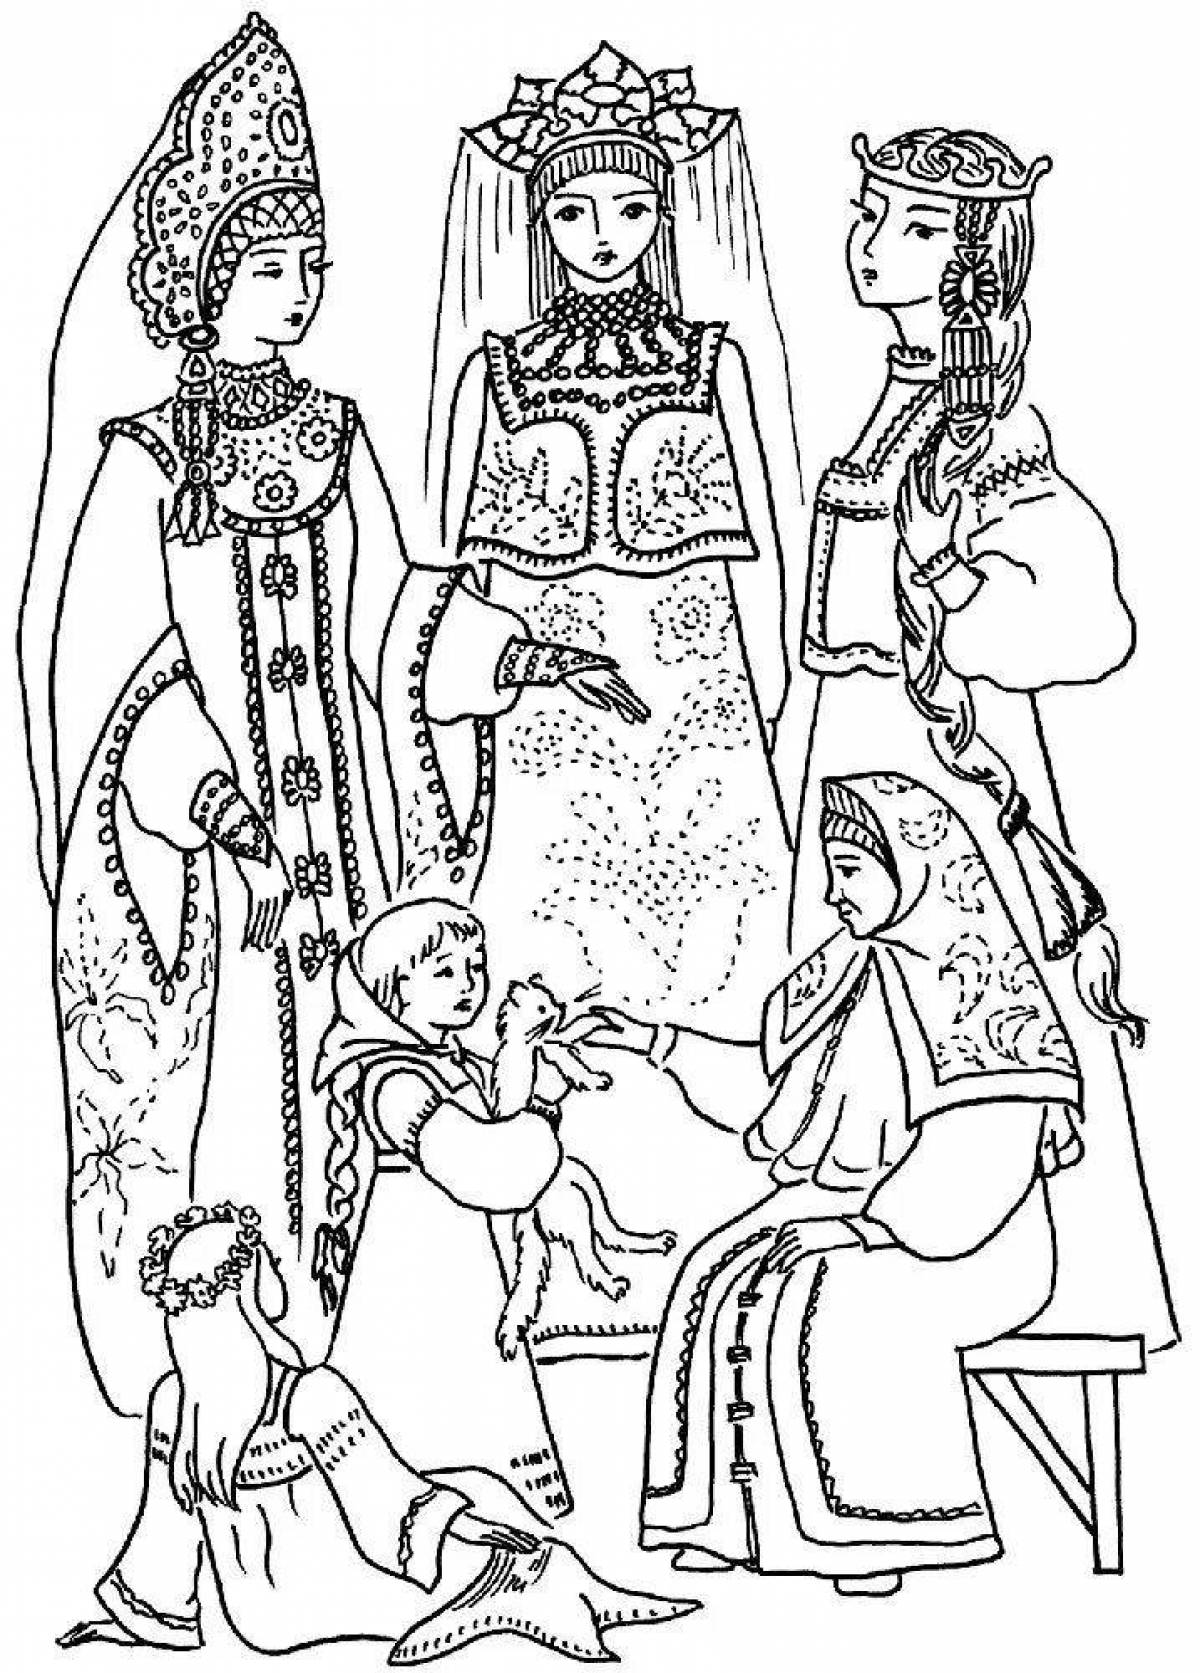 Gorgeous Russian folk costume coloring book for kids